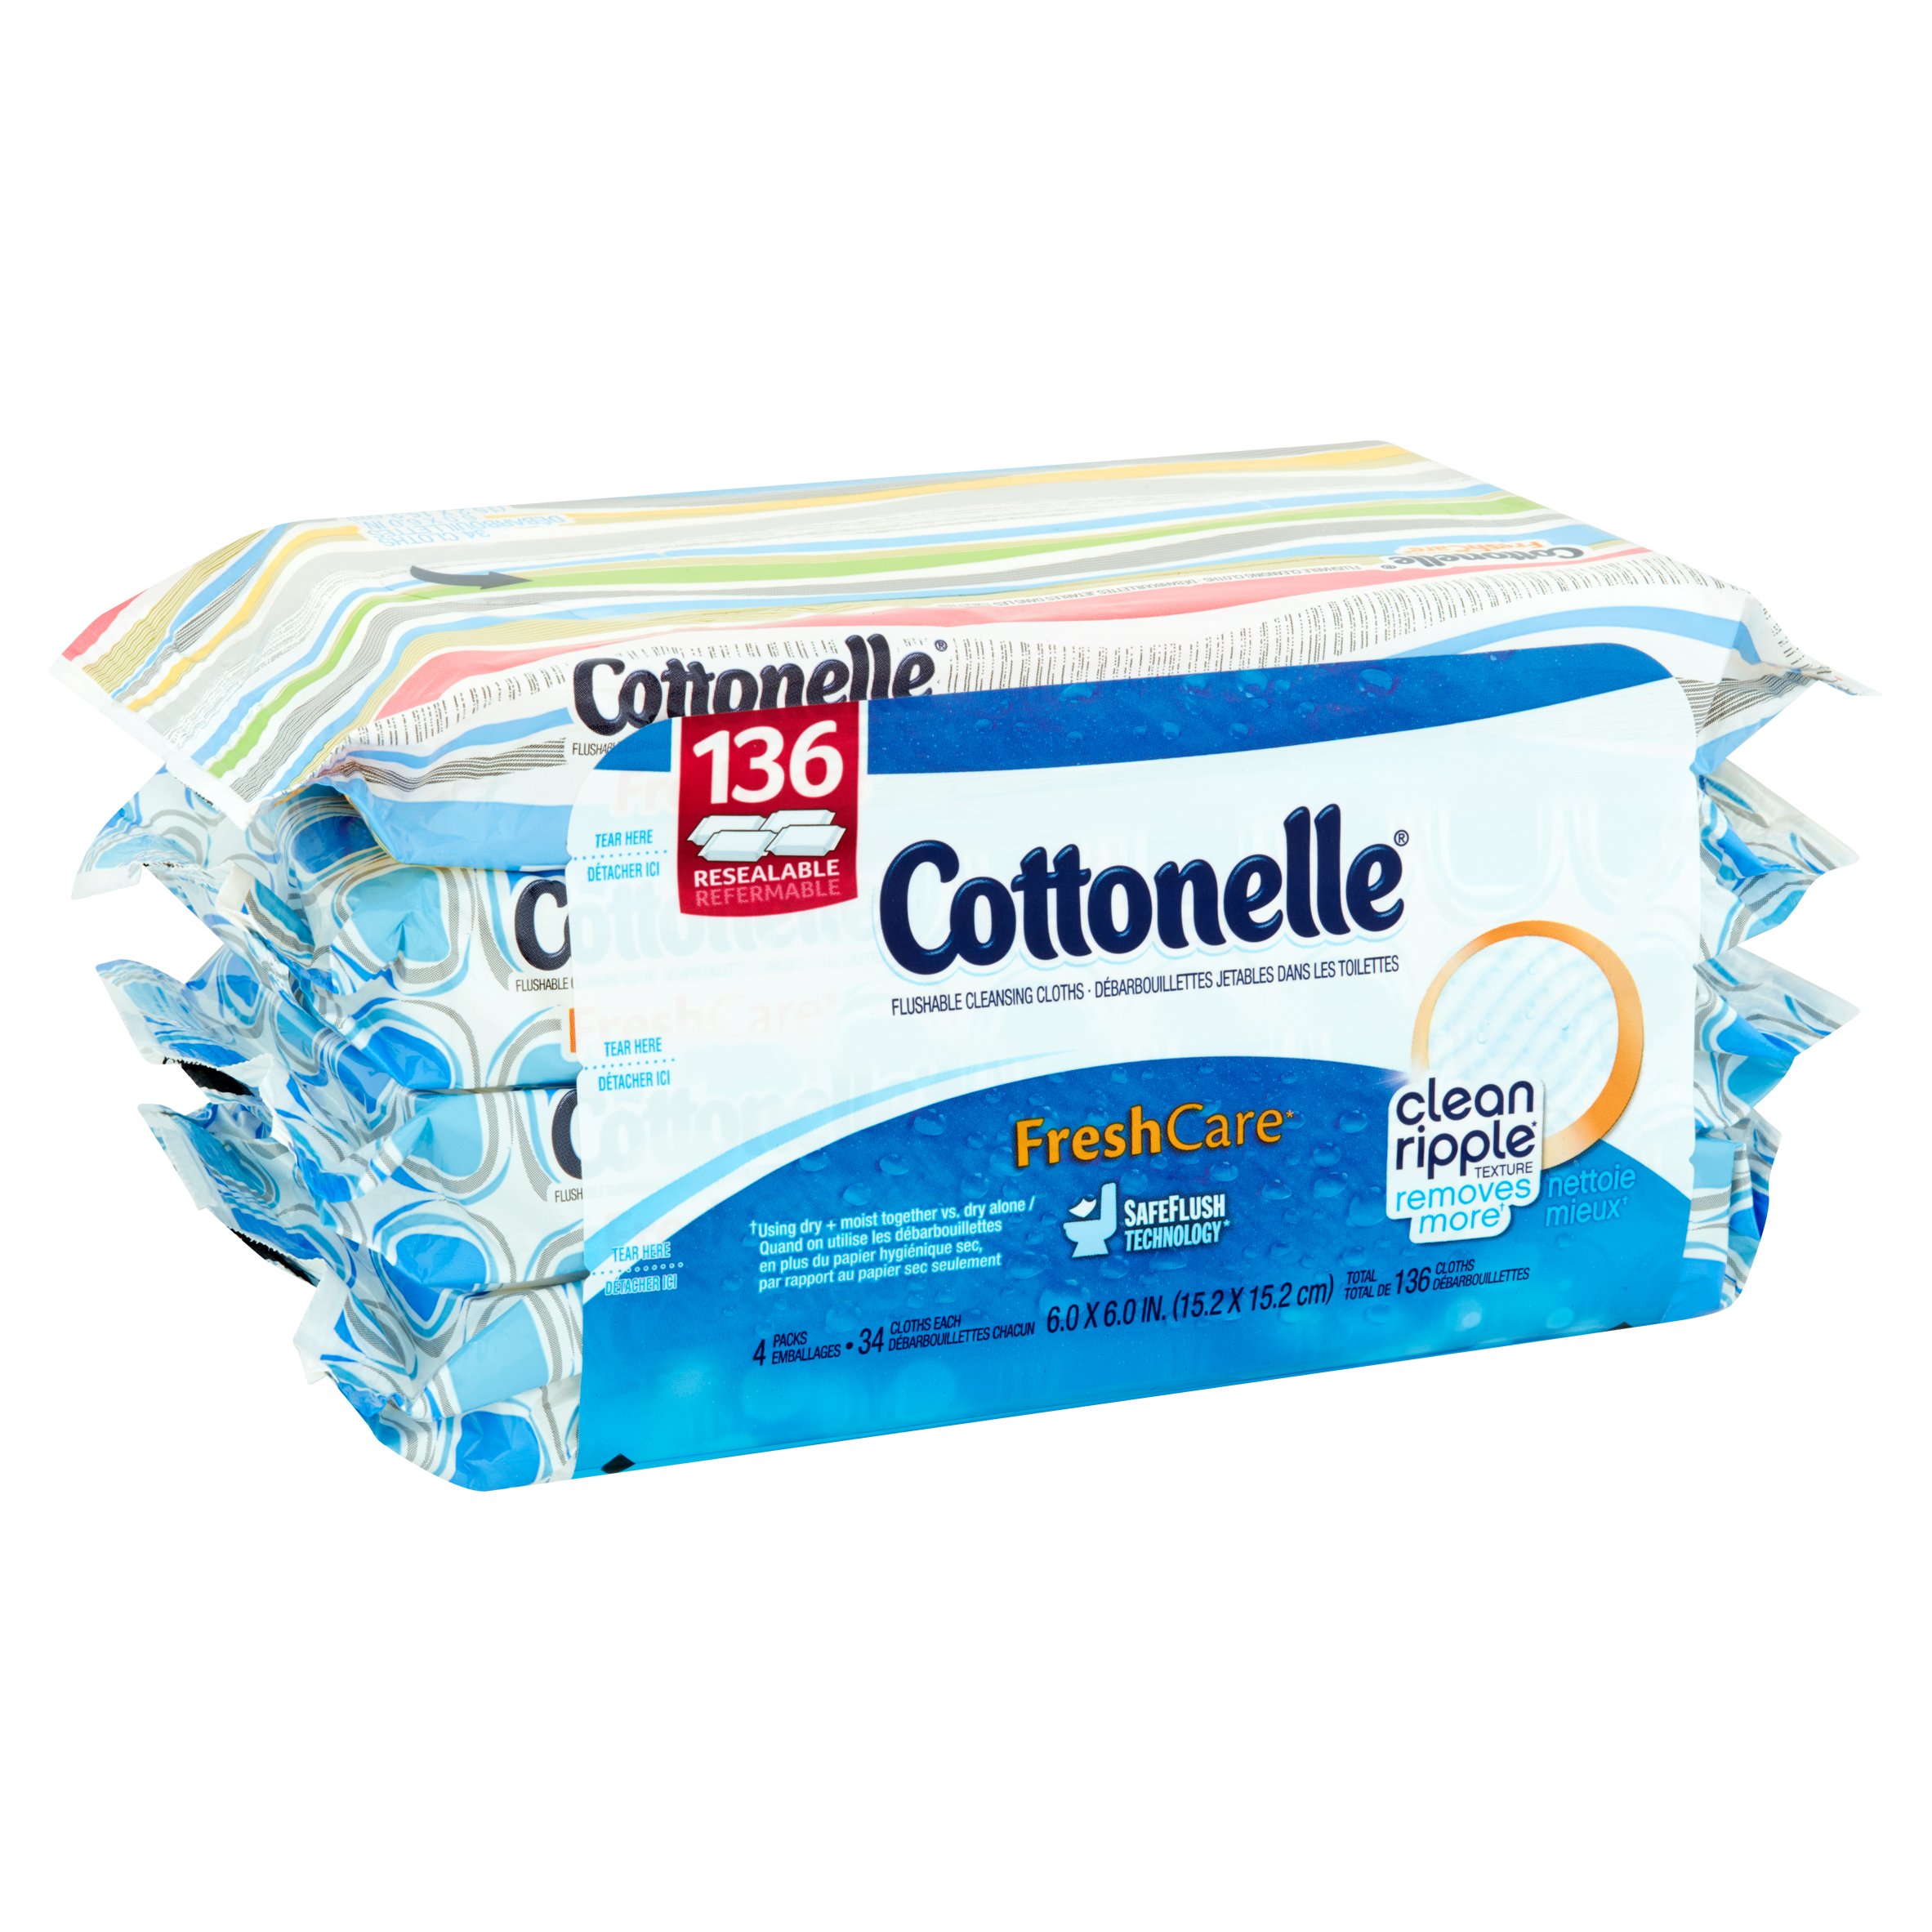 Cottonelle FreshCare Flushable Cleansing Cloths, 136 count, 4 pack - image 3 of 6